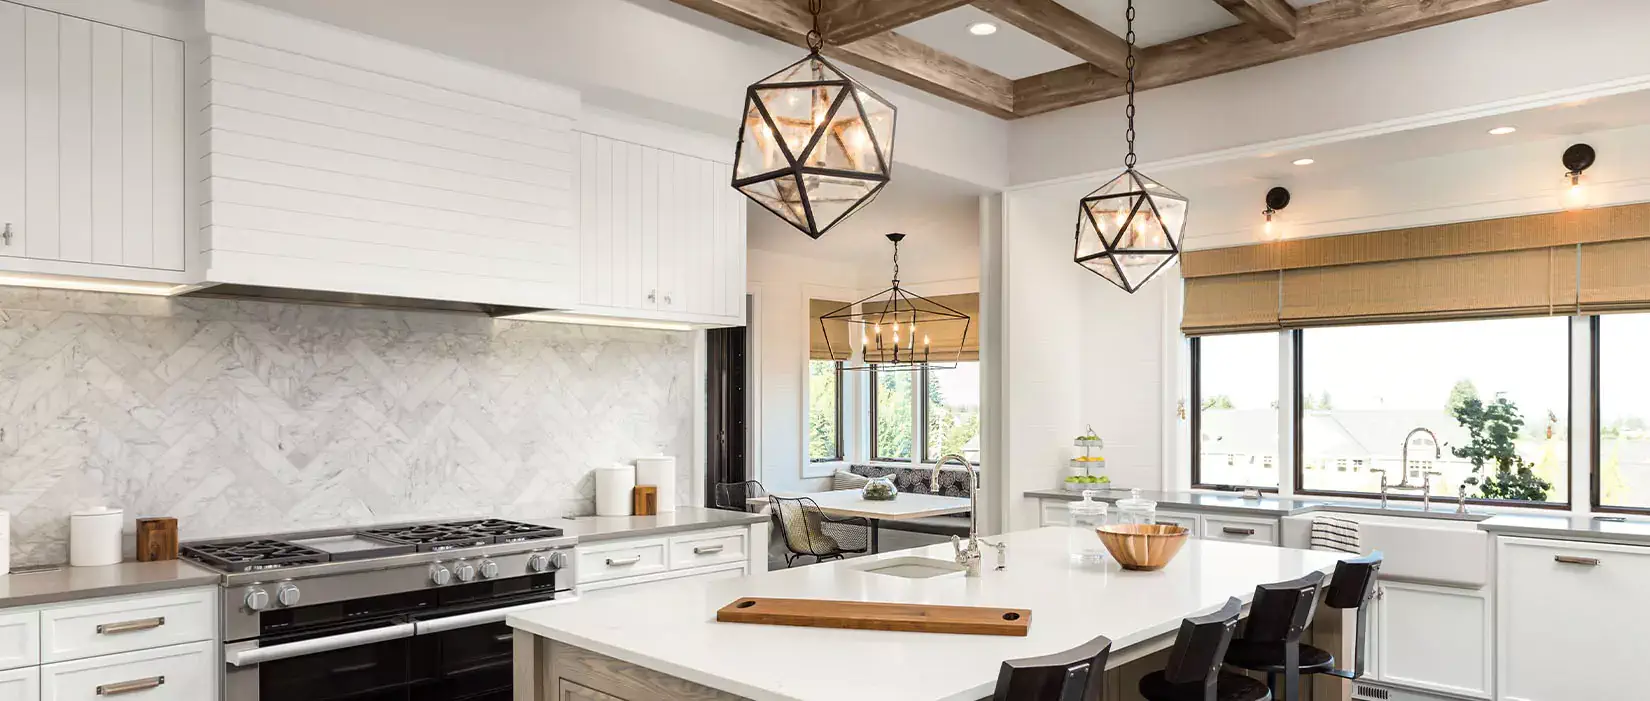 Modern farmhouse kitchen with pendant lights, wood beams, and natural wood elements.